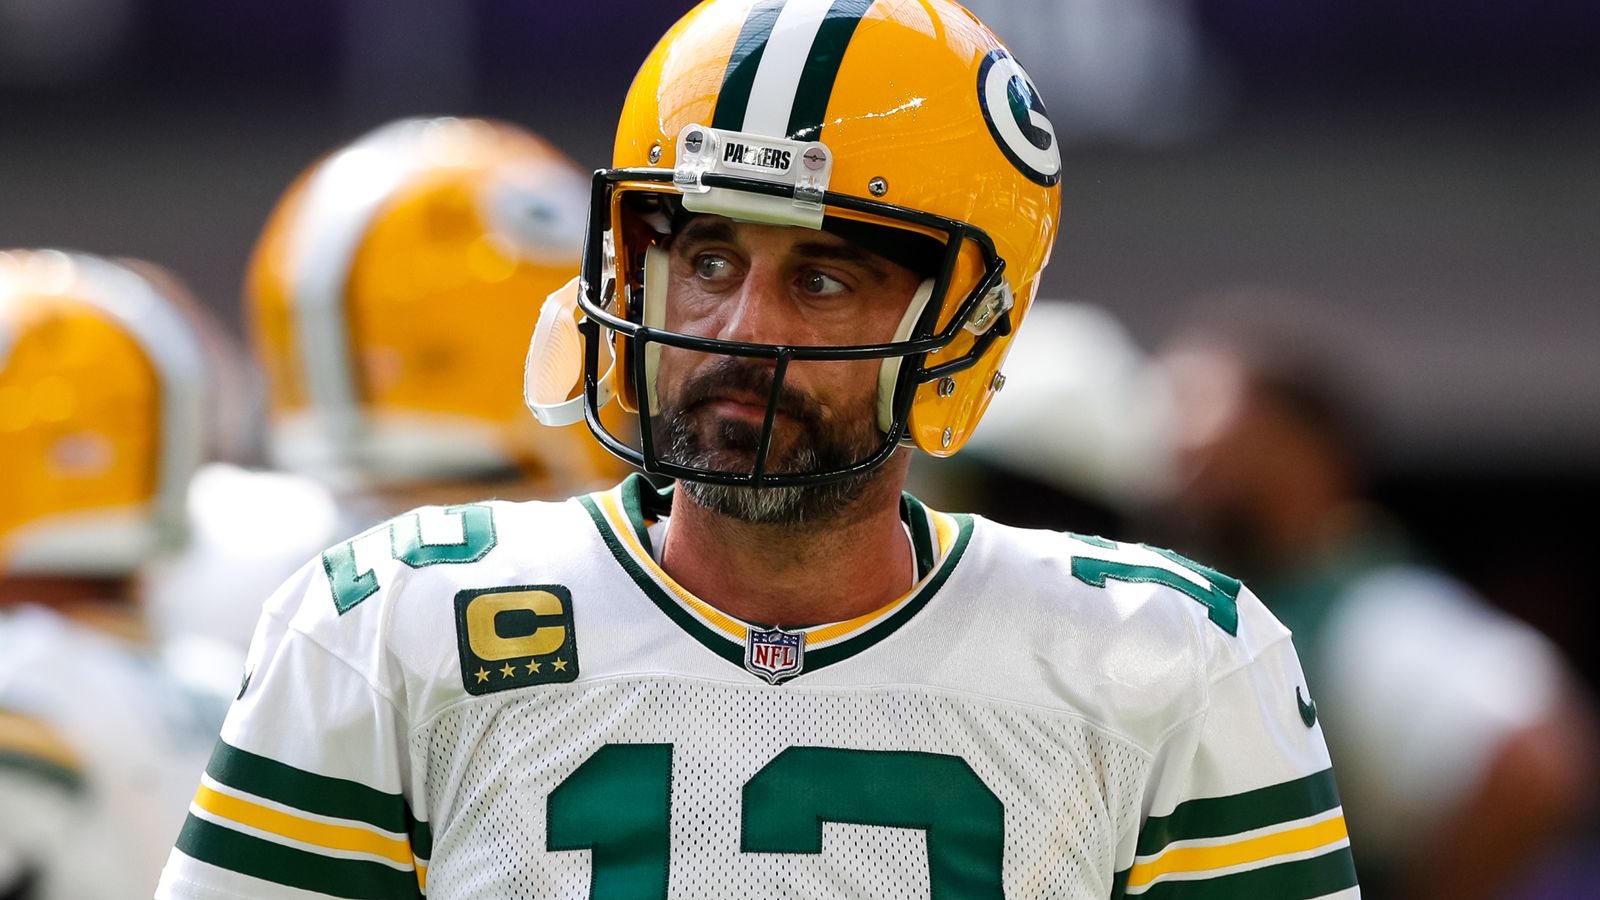 Aaron Rodgers: Green Bay Packers quarterback says his lone Super Bowl win was ‘too long ago’